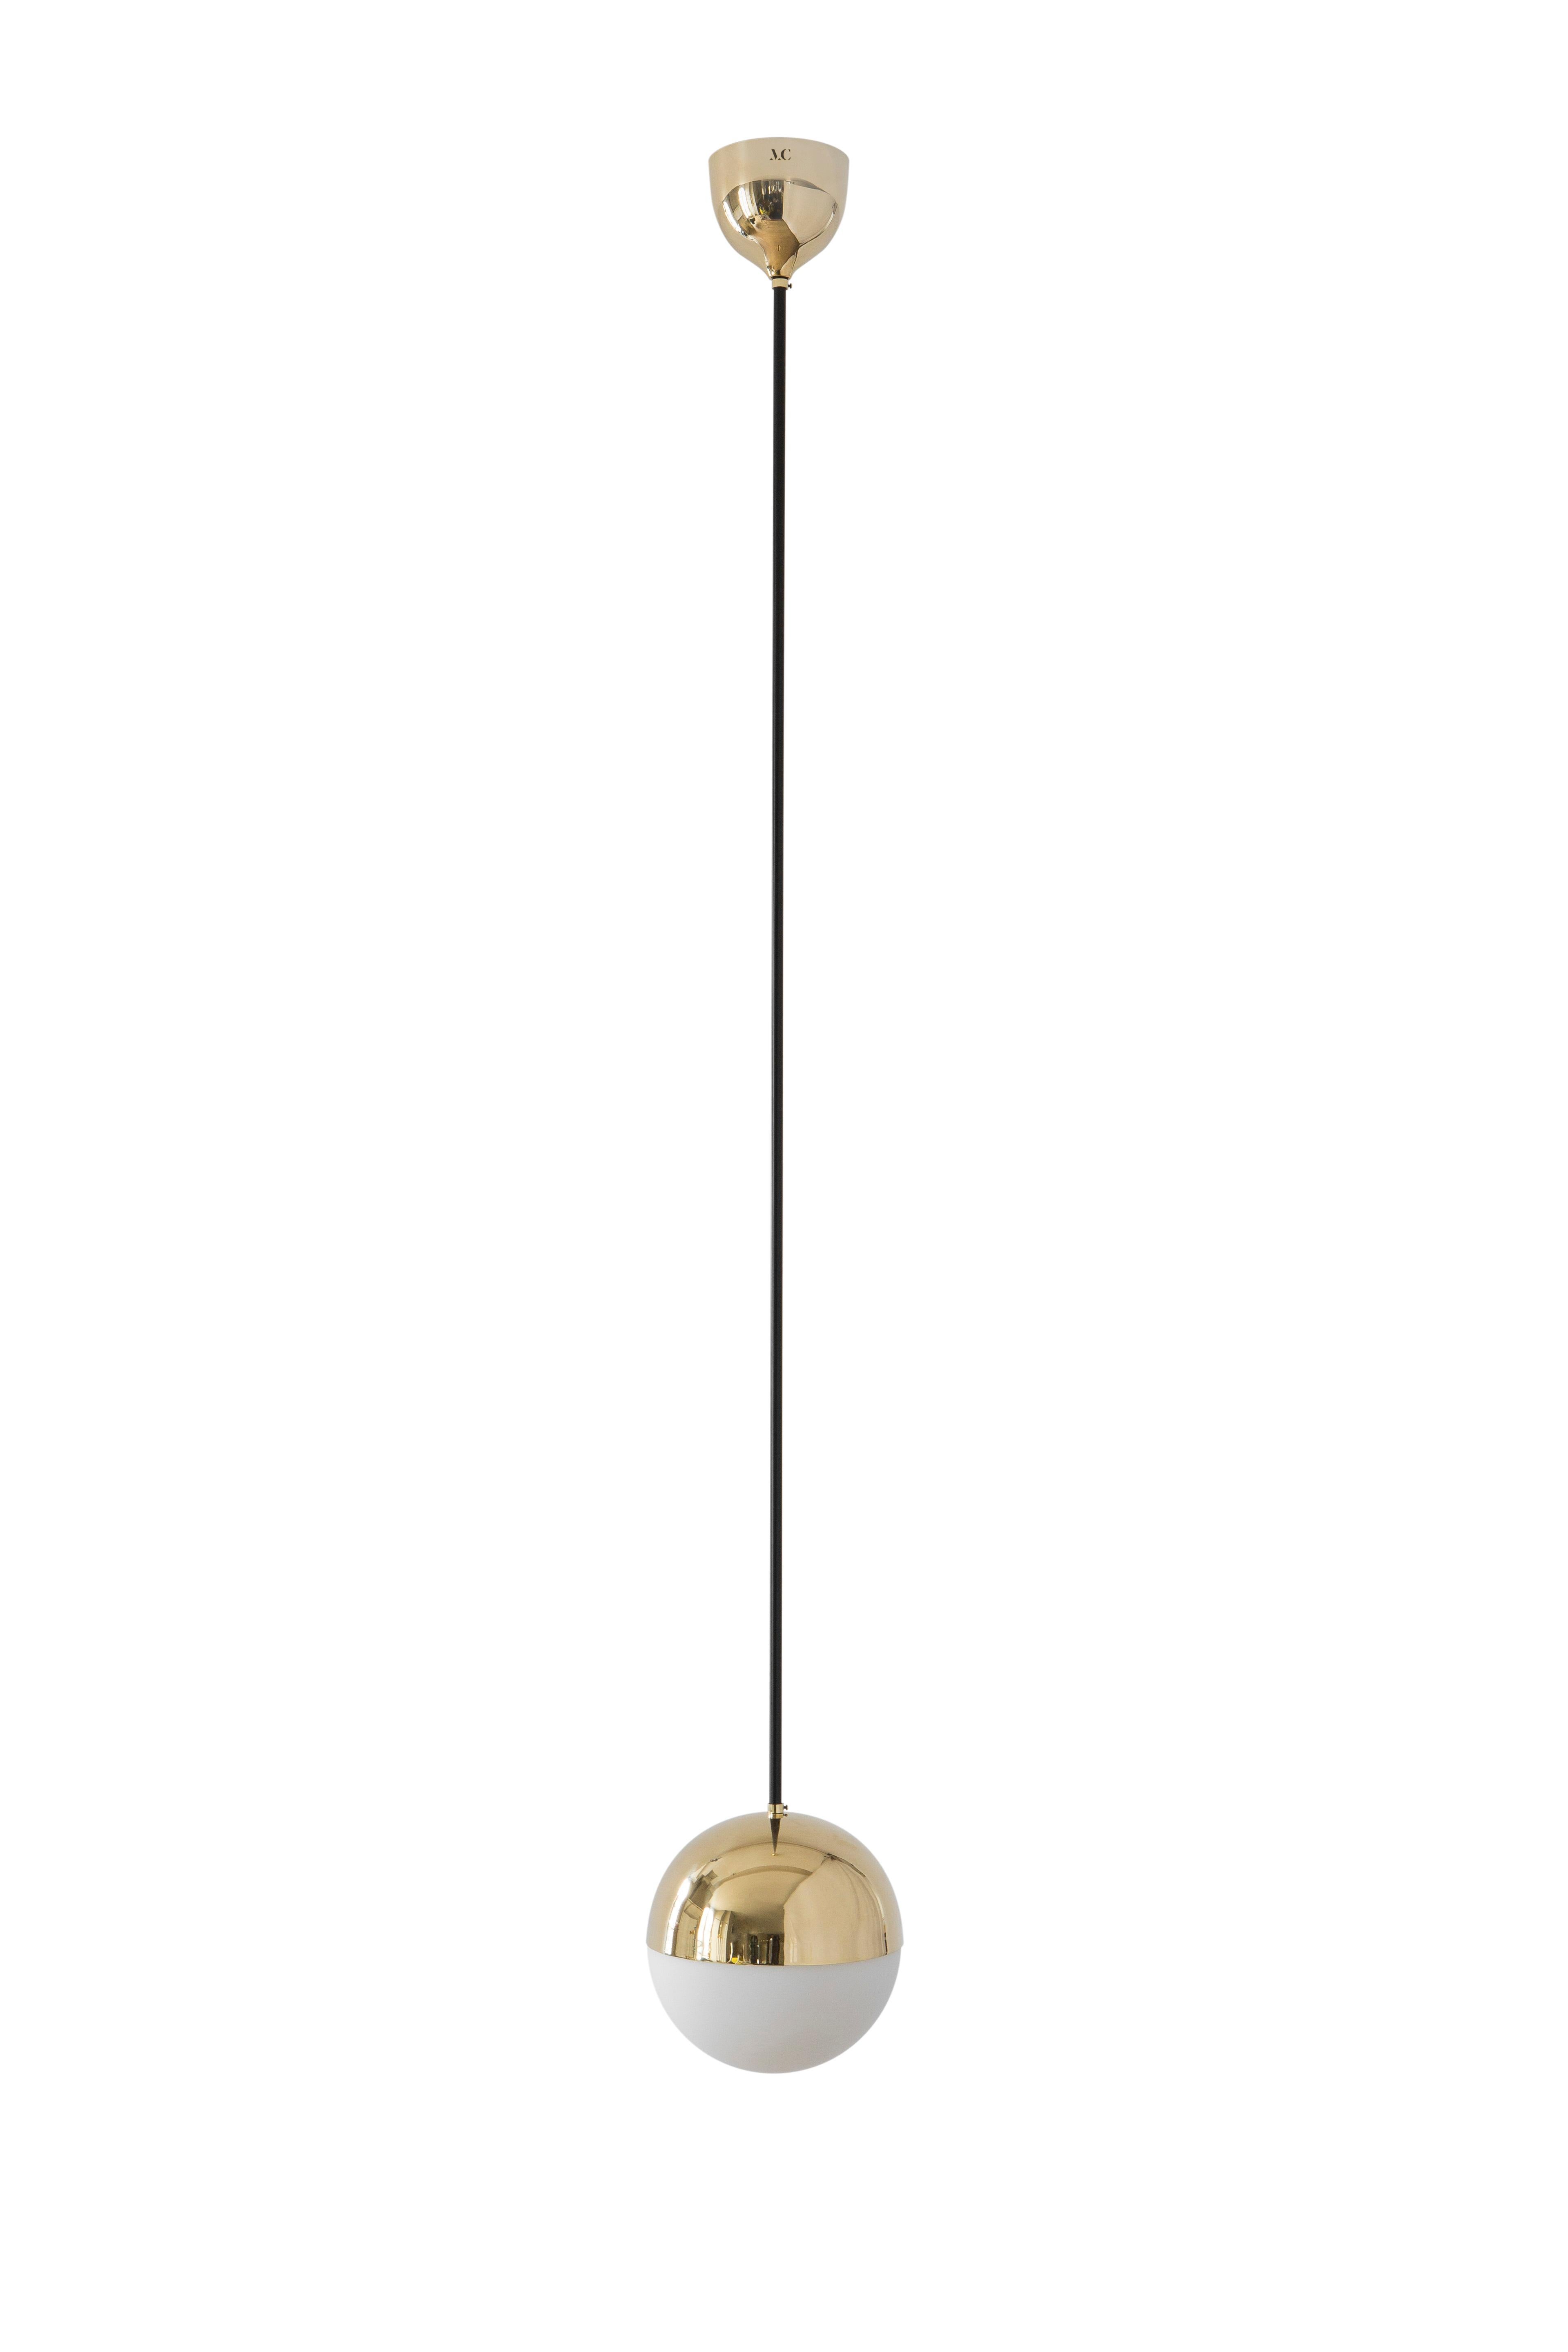 Pendant 01 by Magic Circus Editions.
Dimensions: D 25 x W 25 x H 190 cm, also available in H 110, 130, 150, 175 cm.
Materials: brass, mouth blown glass.

All our lamps can be wired according to each country. If sold to the USA it will be wired